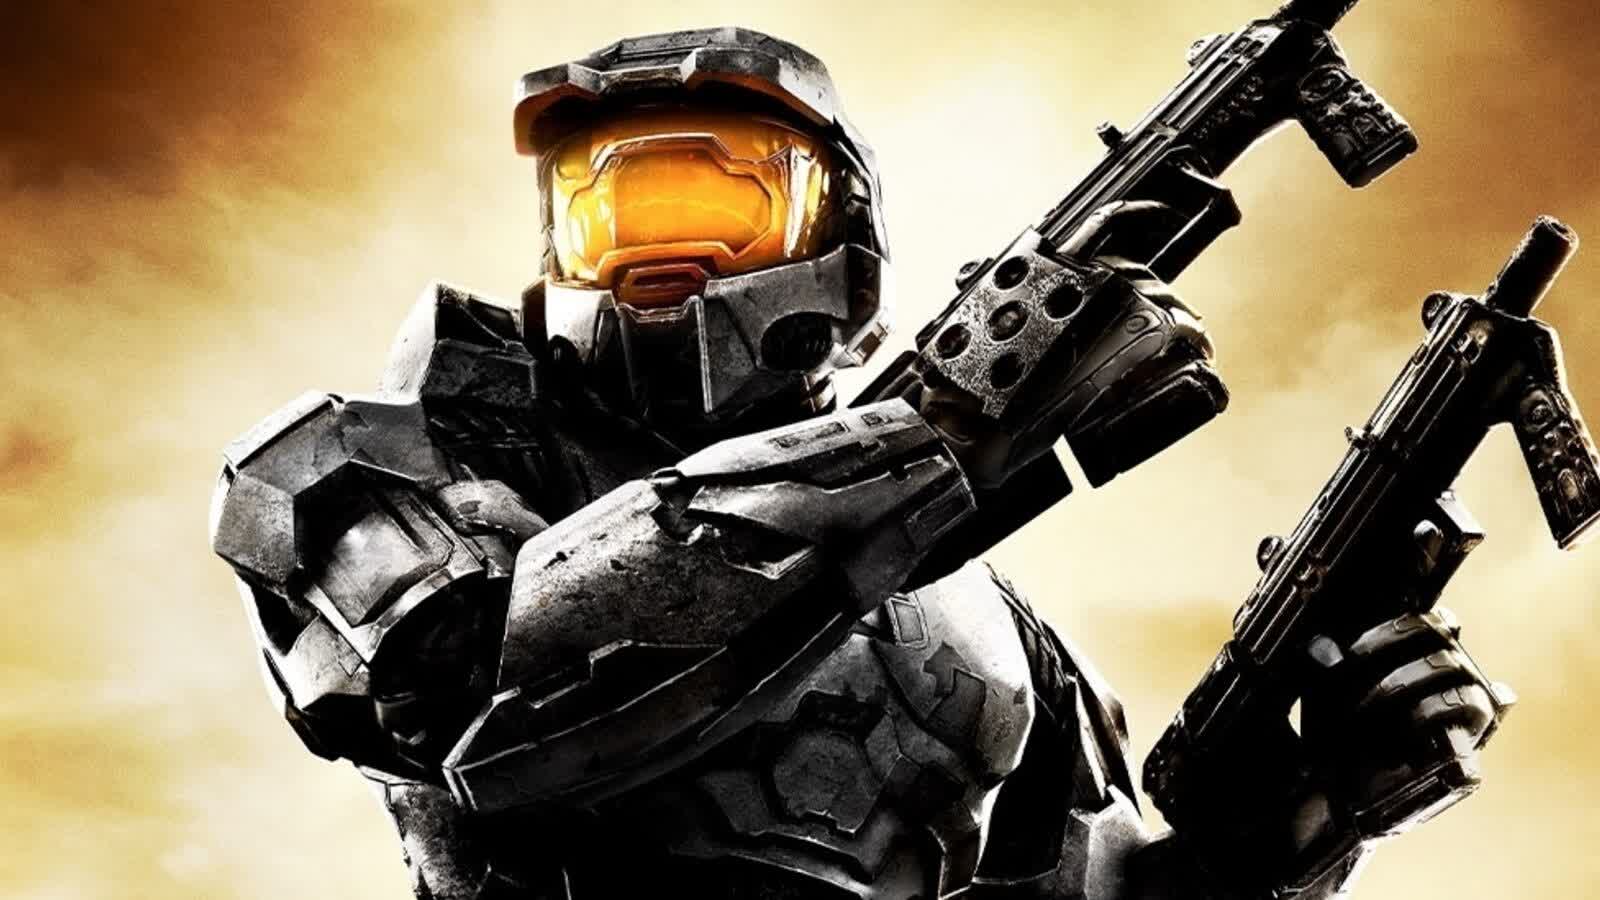 You could win $20,000 by completing this almost impossible Halo 2 challenge